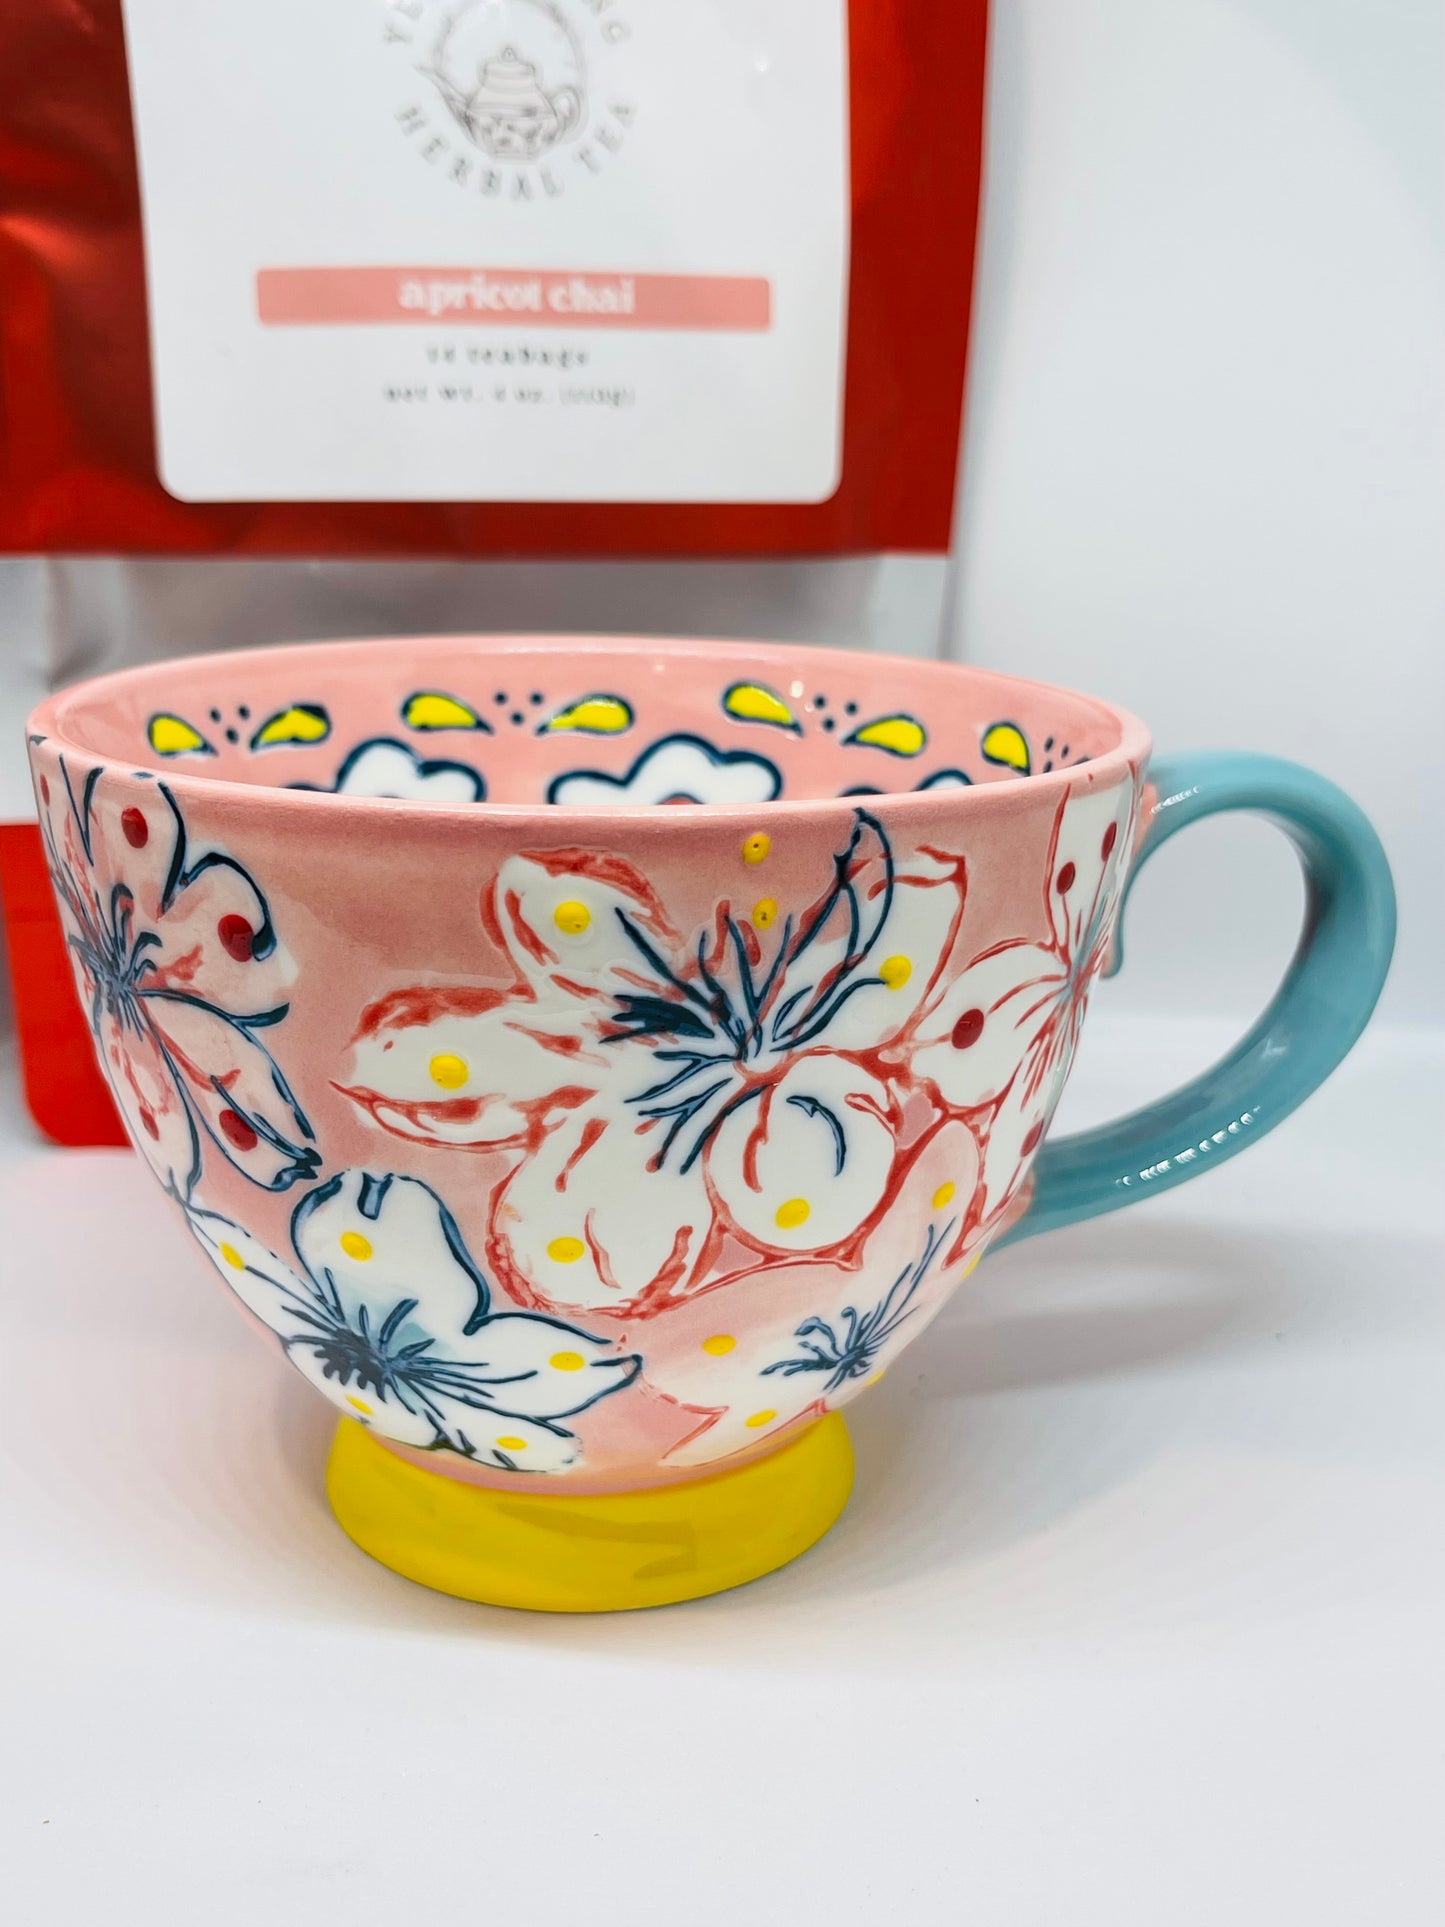 A light pink tea mug with red and navy blue trimmed white and pink flowers with yellow and red dots, a yellow base, and a turquoise handle.